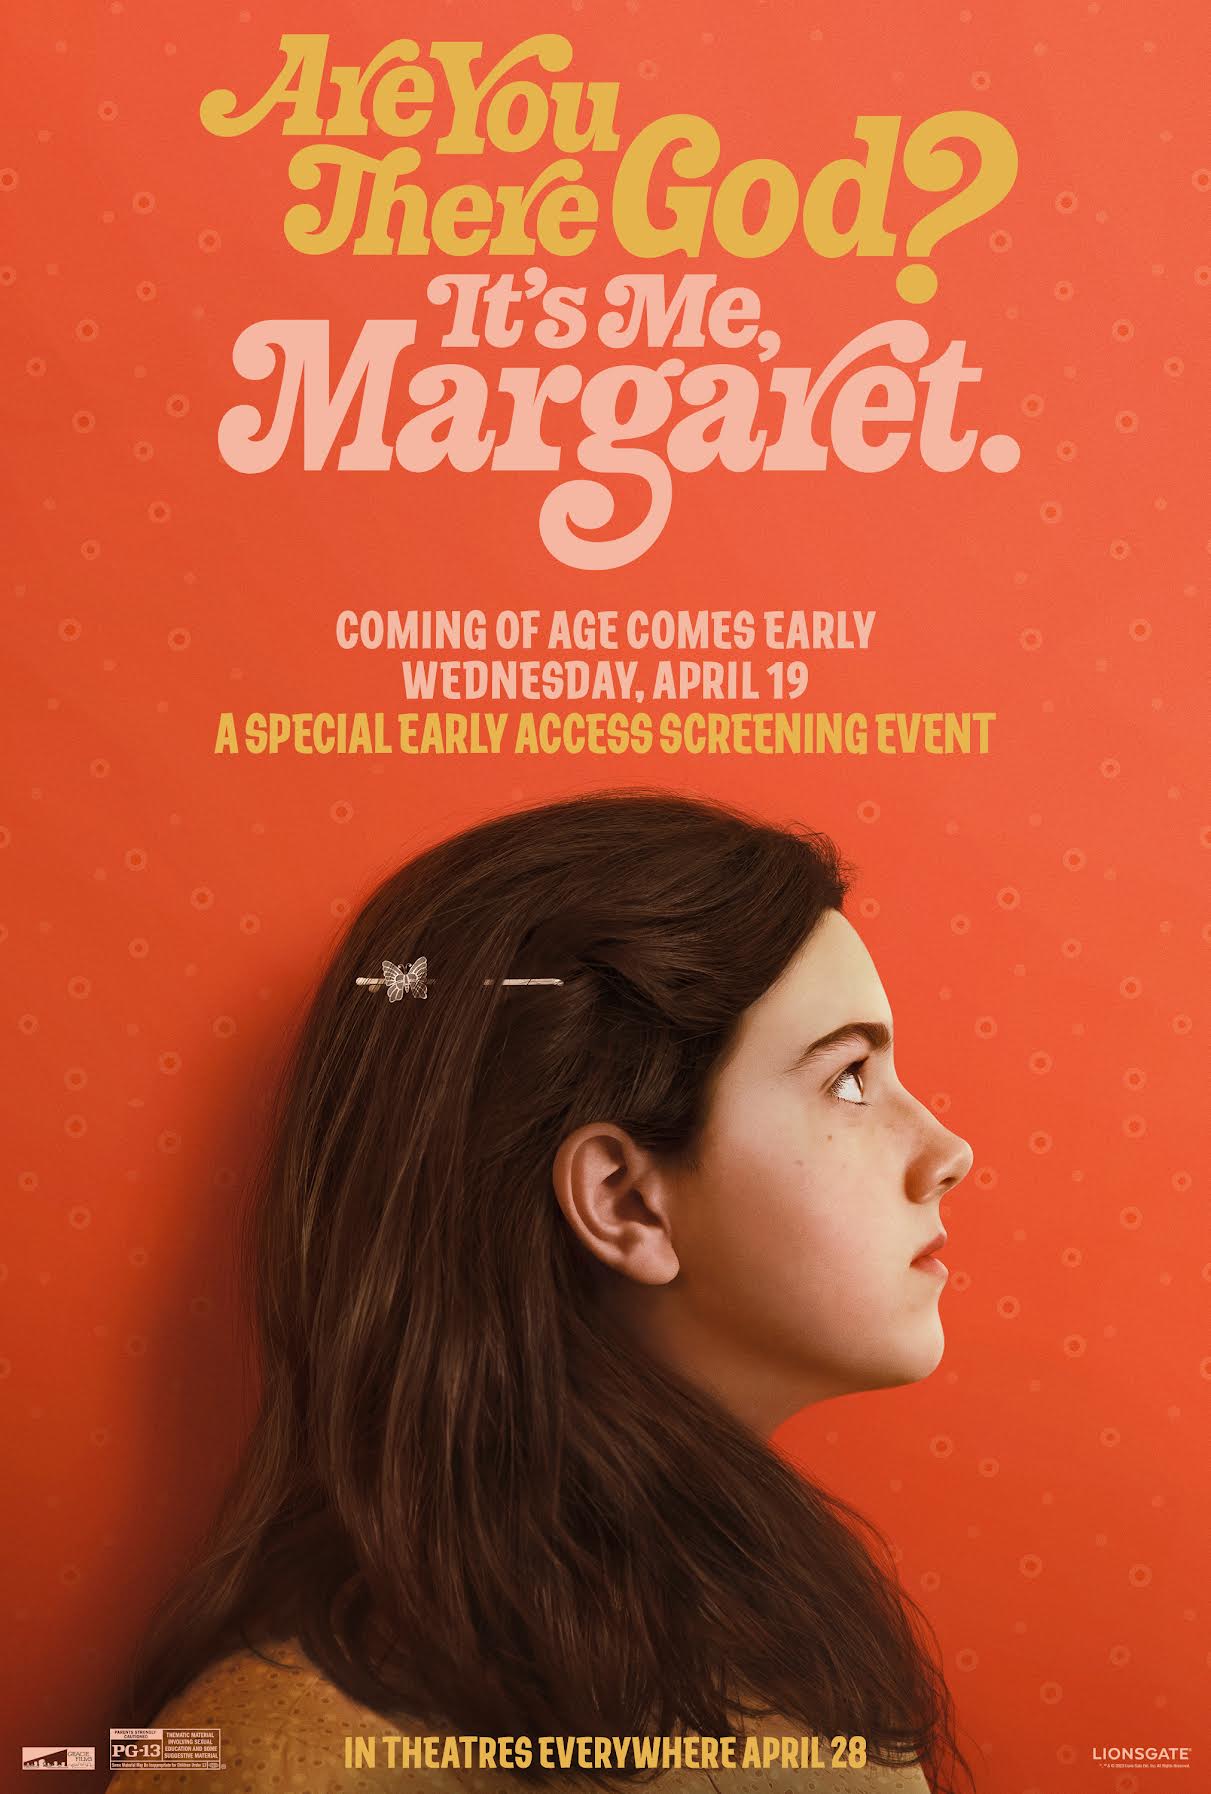 Are You There God? It's Me, Margaret.- Early Access Event